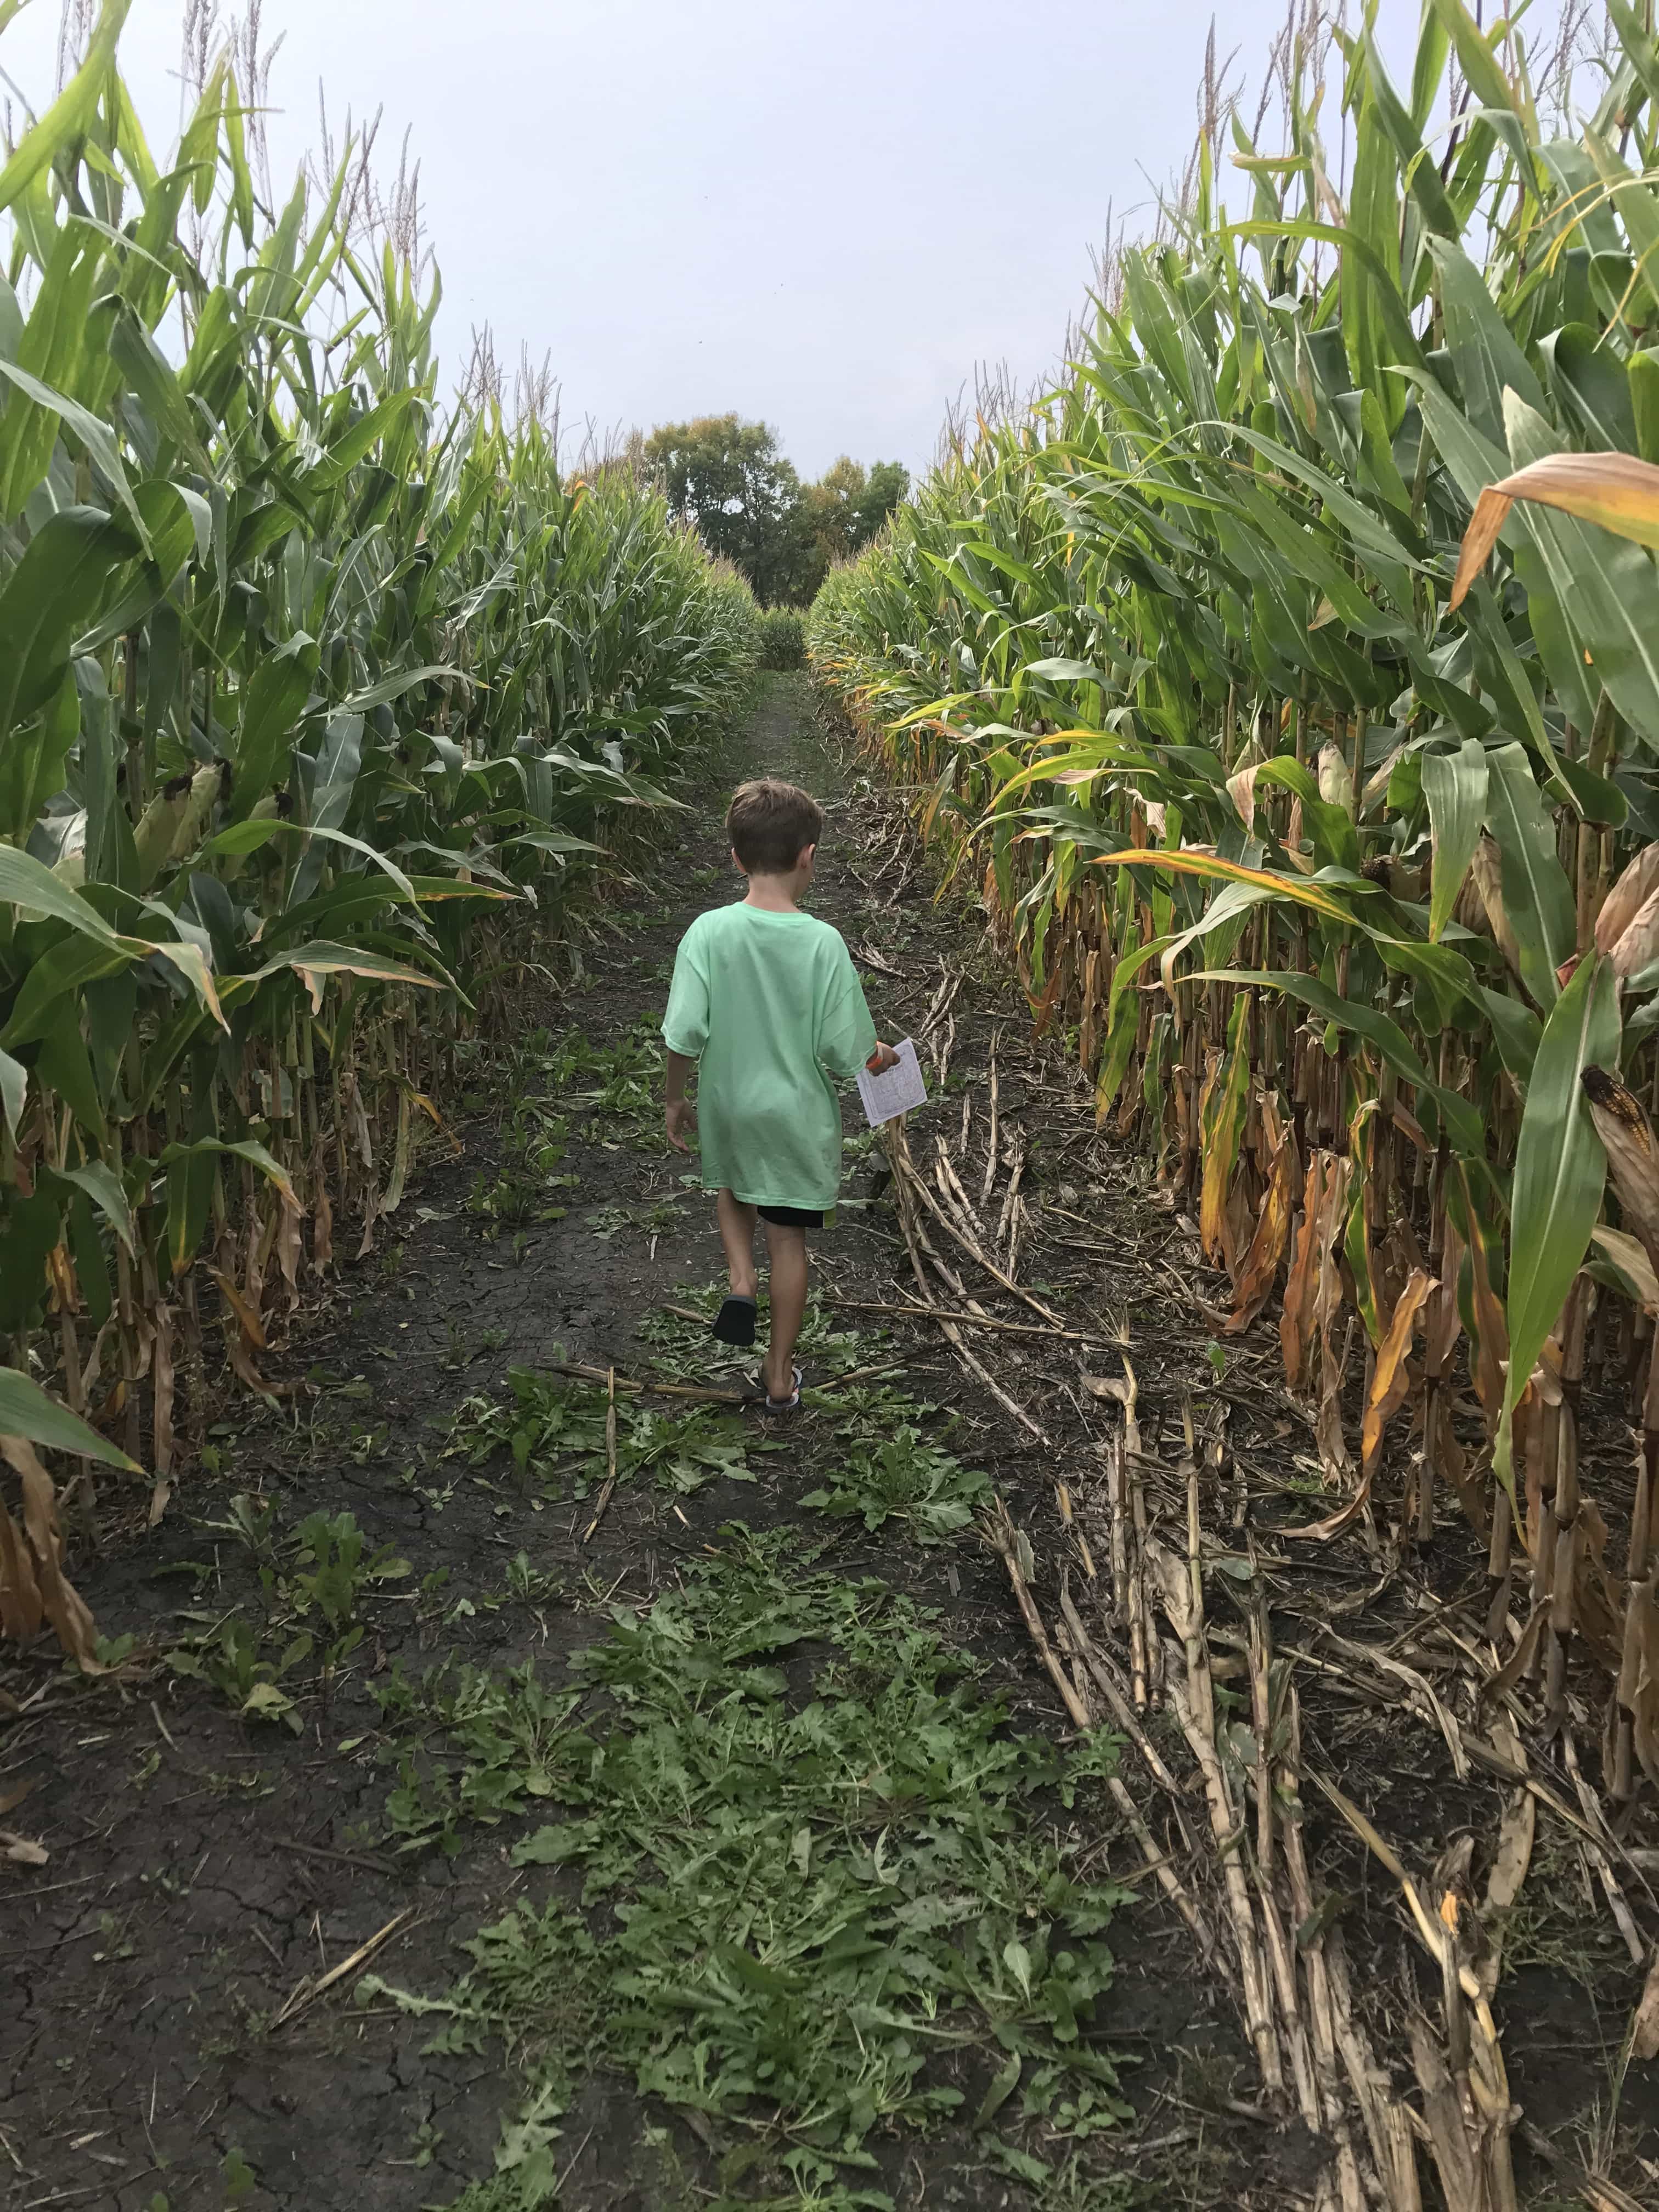 Getting Lost in Corn at the Crow River Wineries Maze